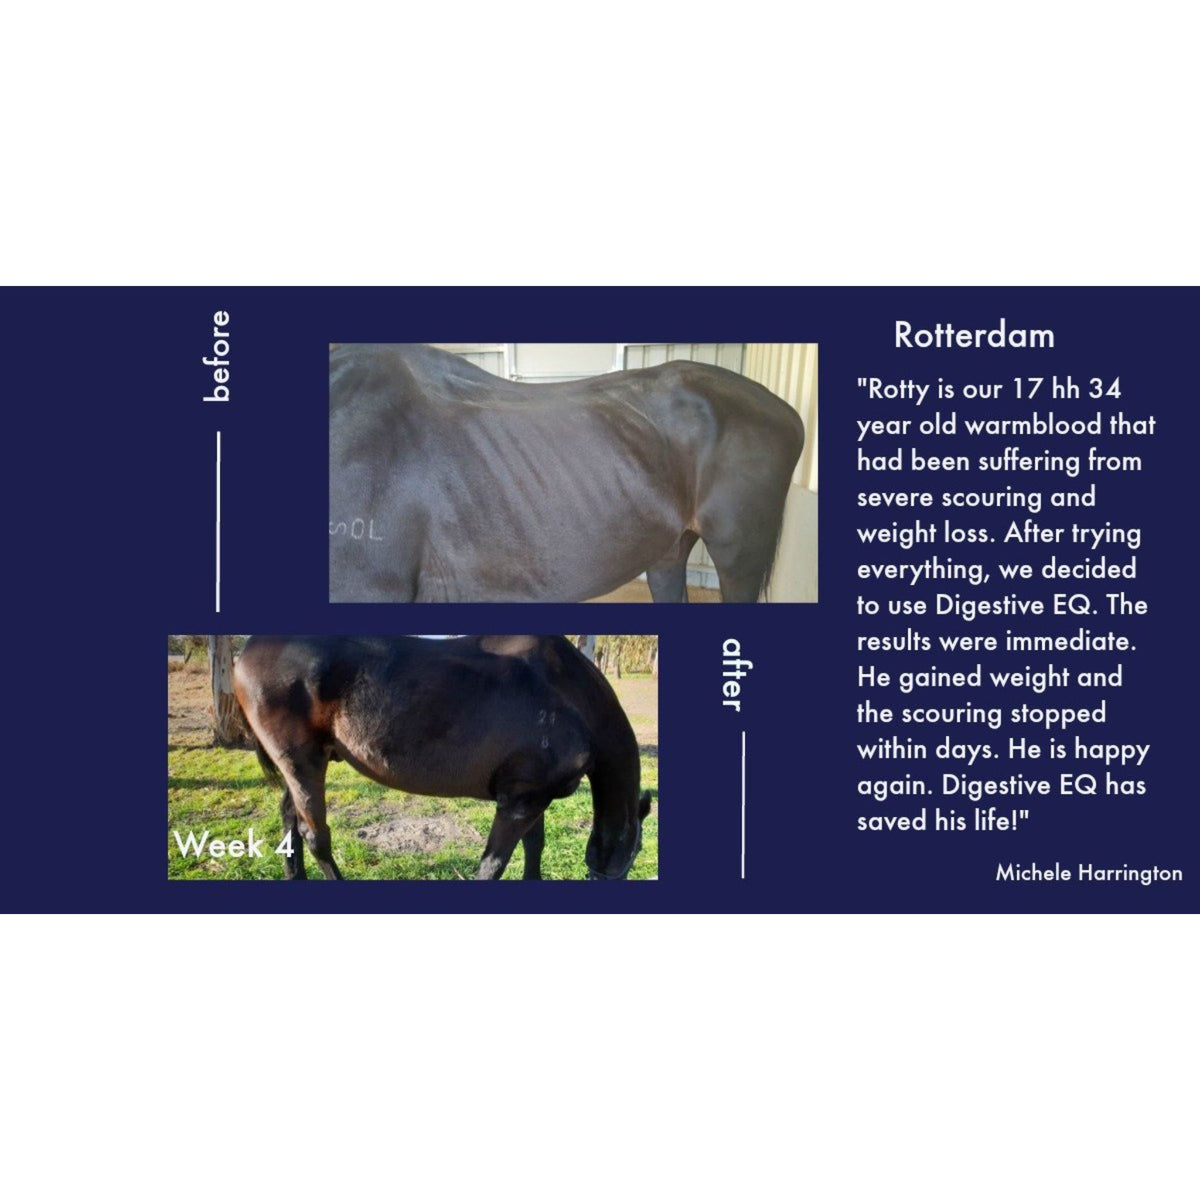 Testimonial poster of improvement of a mature aged horse on Digestive EQ.